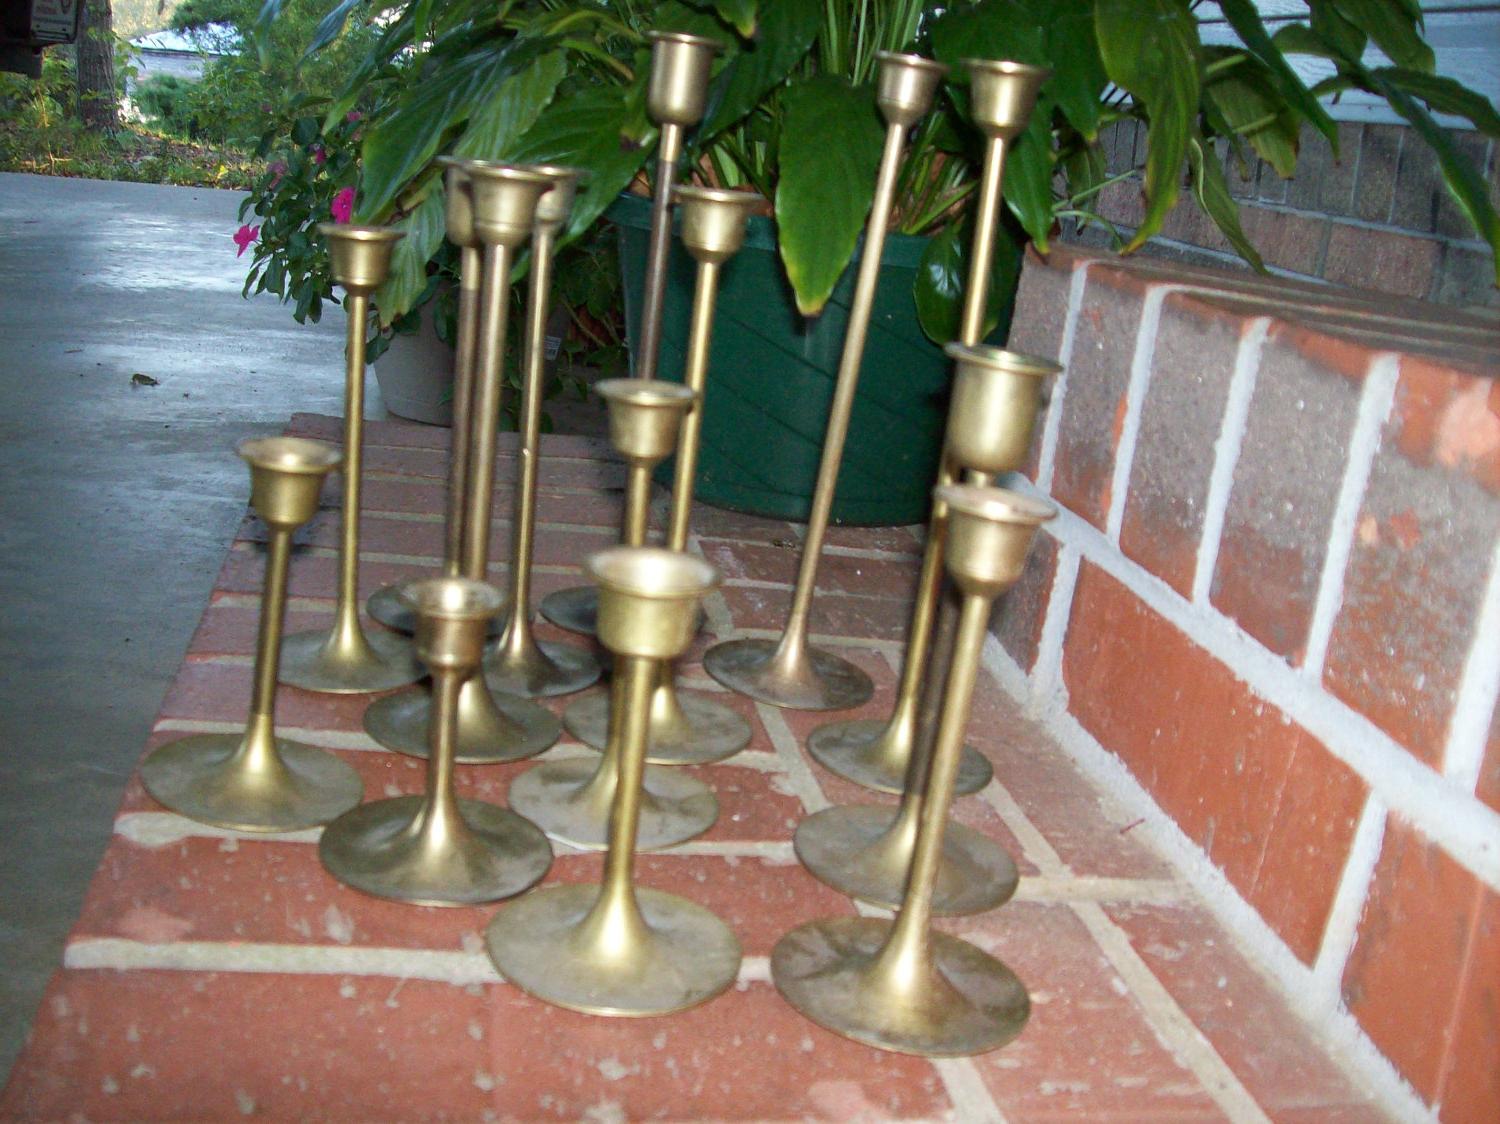 Vintage Brass Candleholders Rustic Wedding Decor 14 Candlesticks French